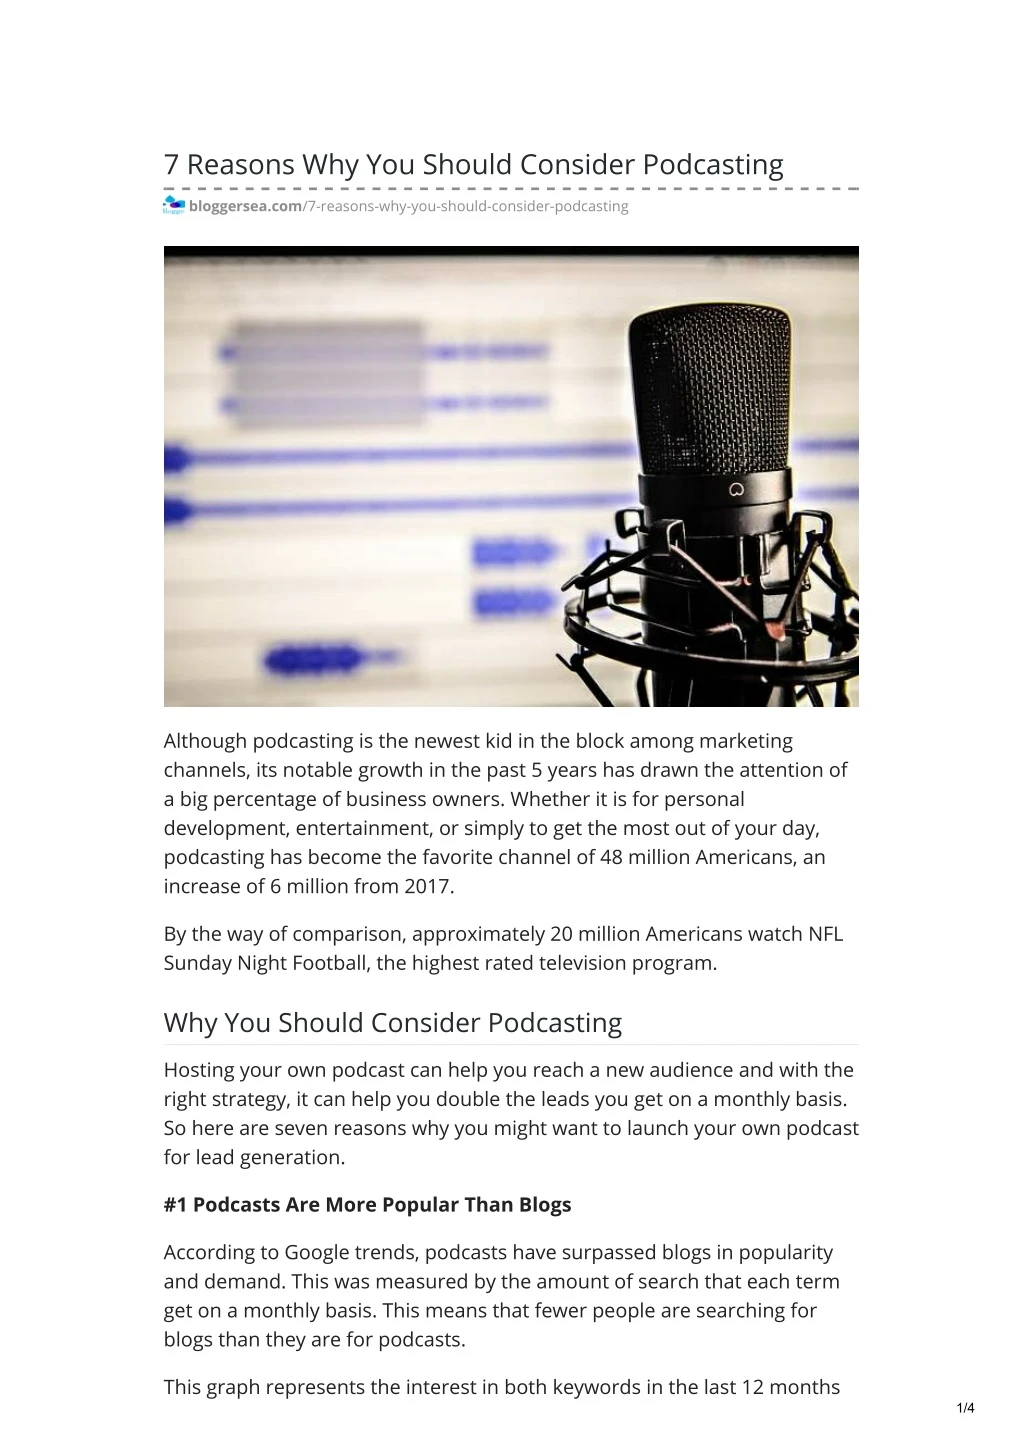 7 reasons why you should consider podcasting